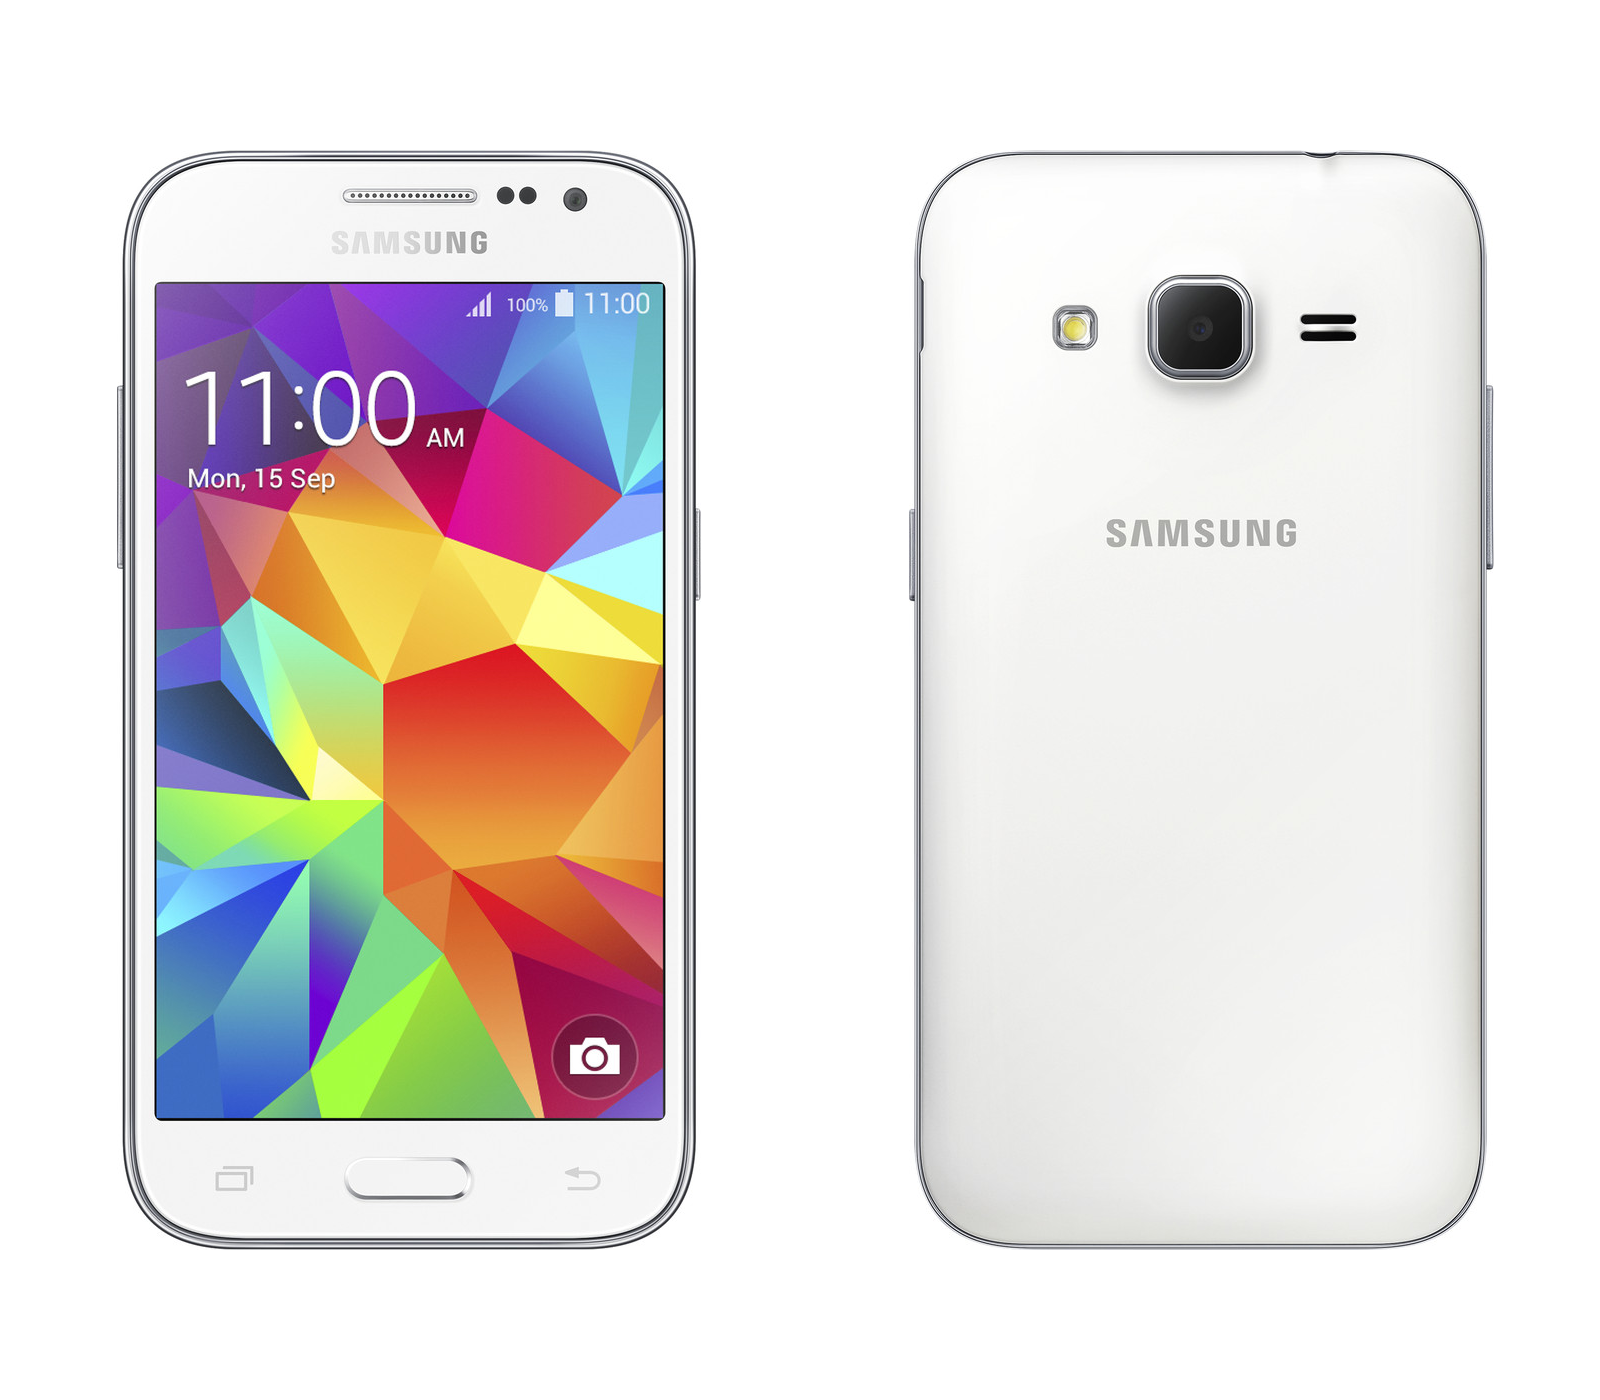 Samsung Galaxy Core Prime specs, review, release date - PhonesData